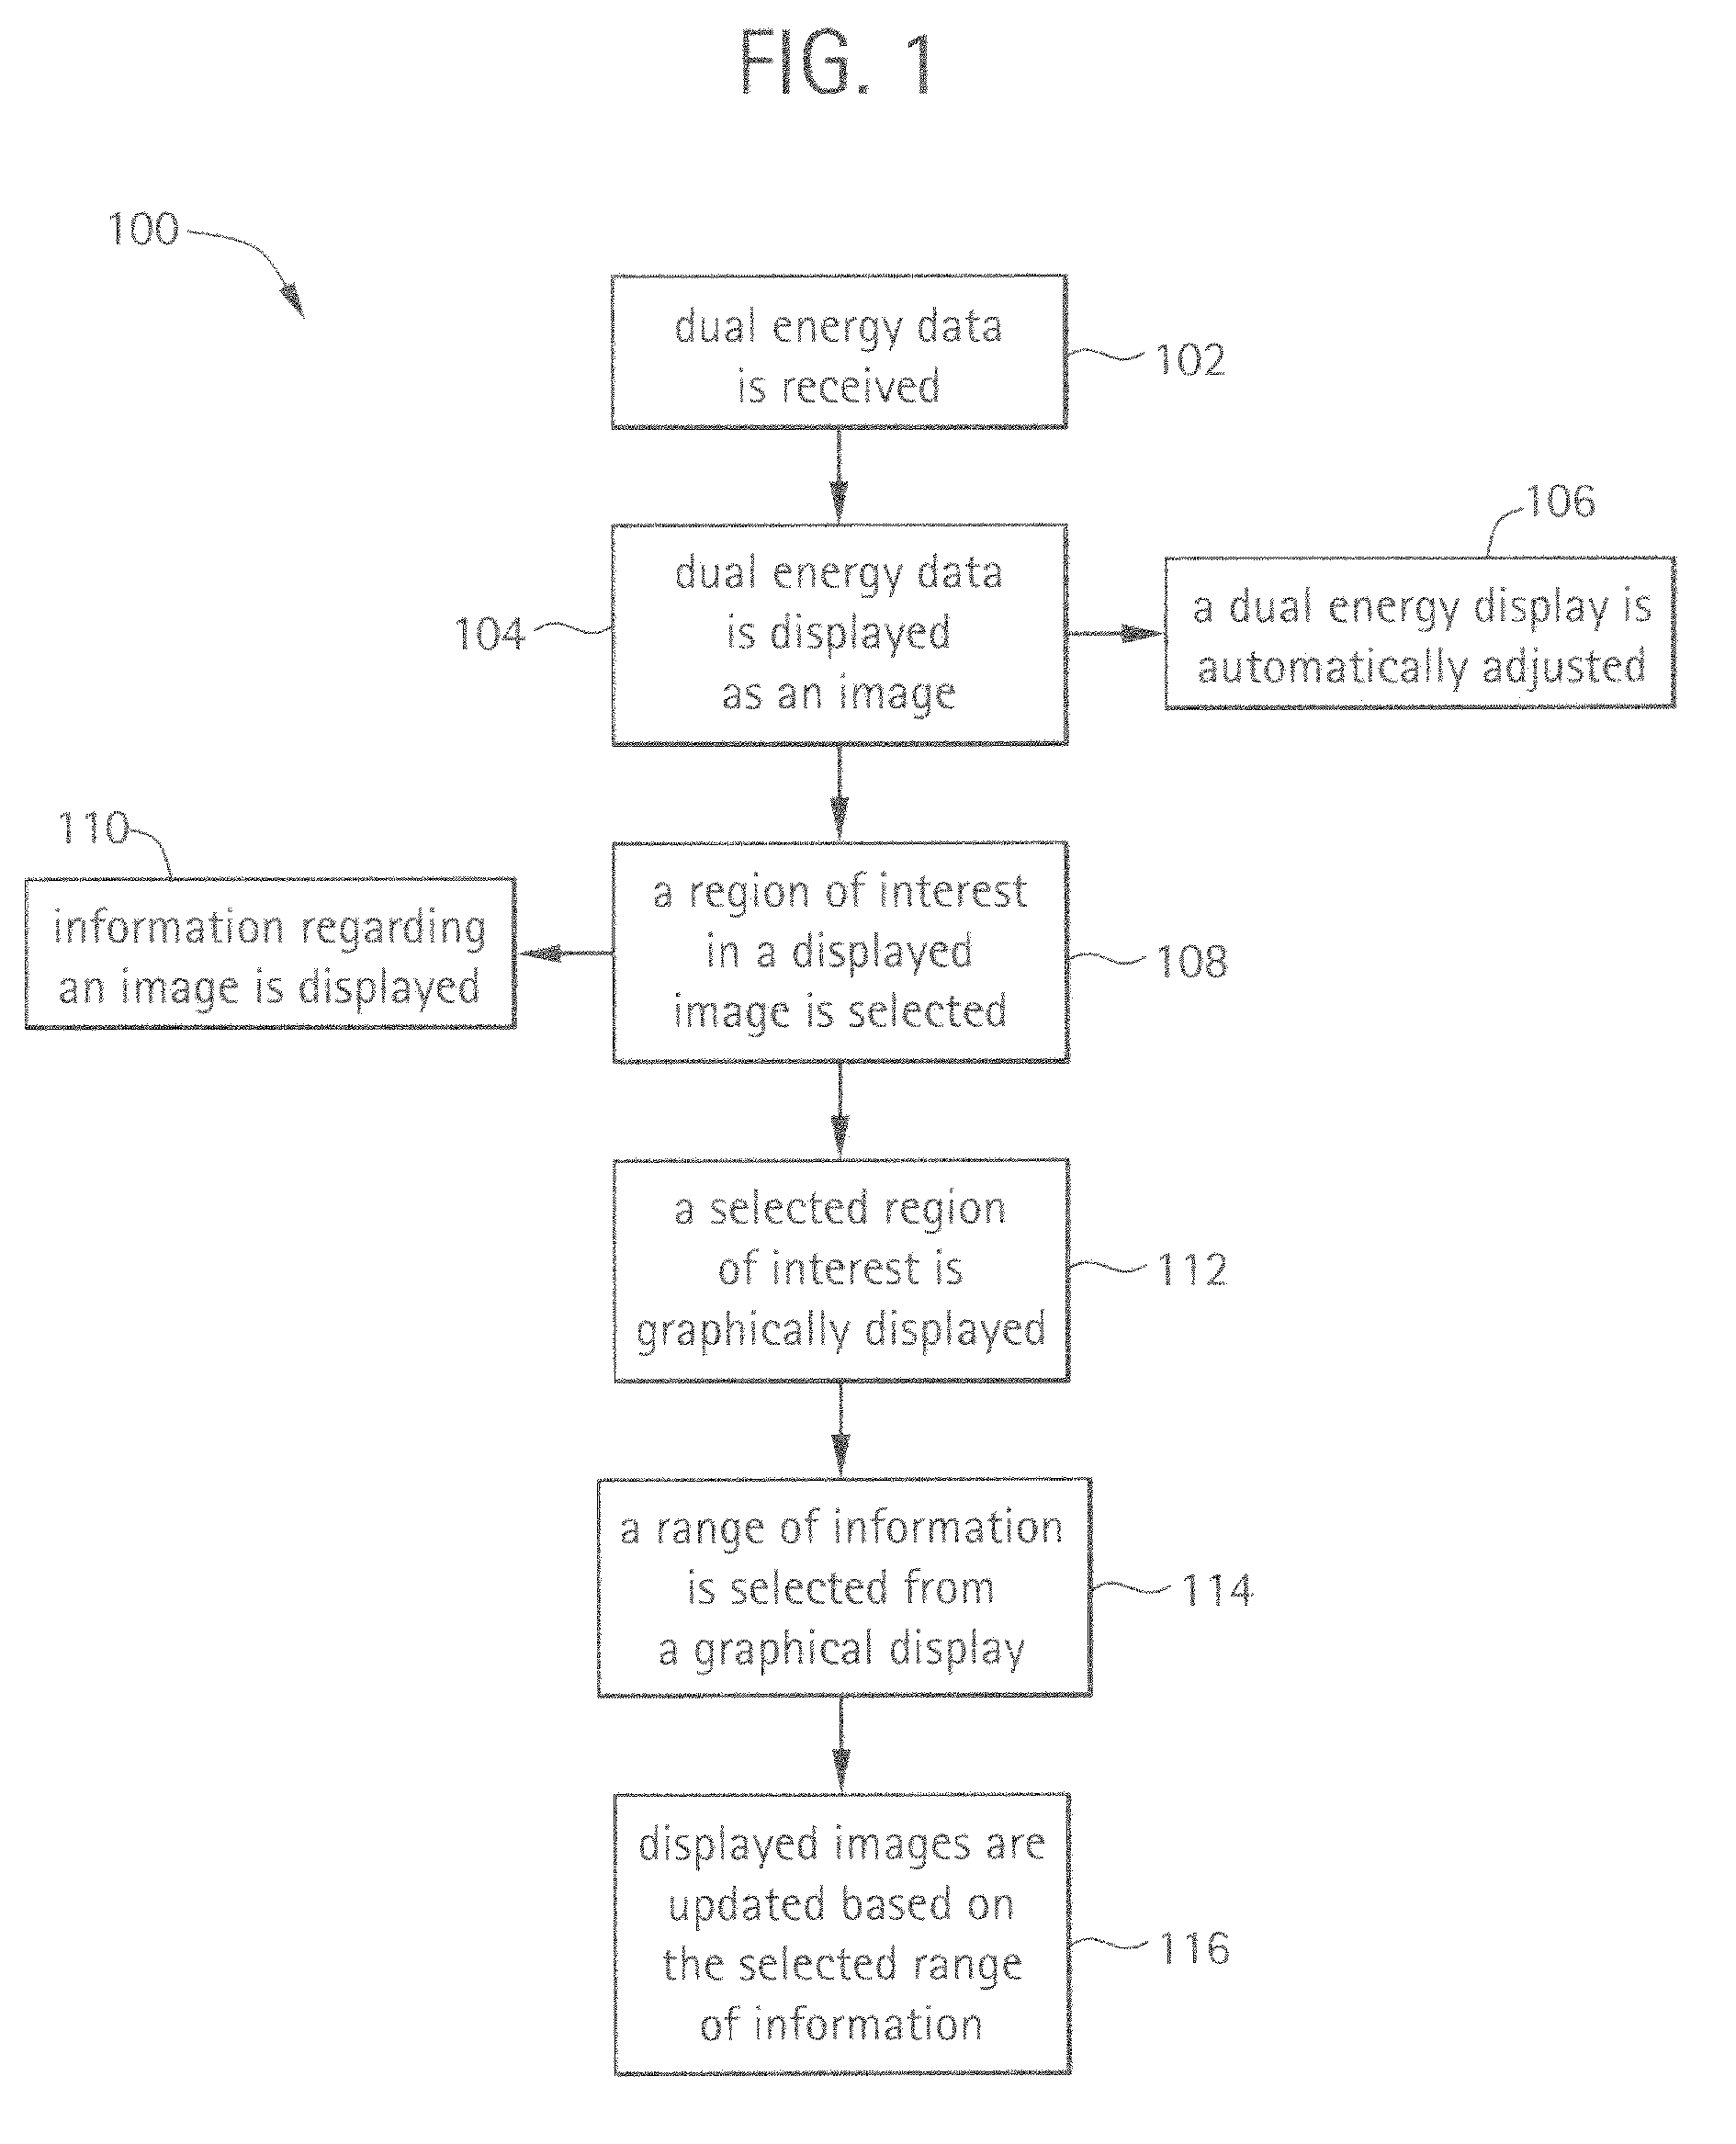 Systems and Methods for Displaying Multi-Energy Data